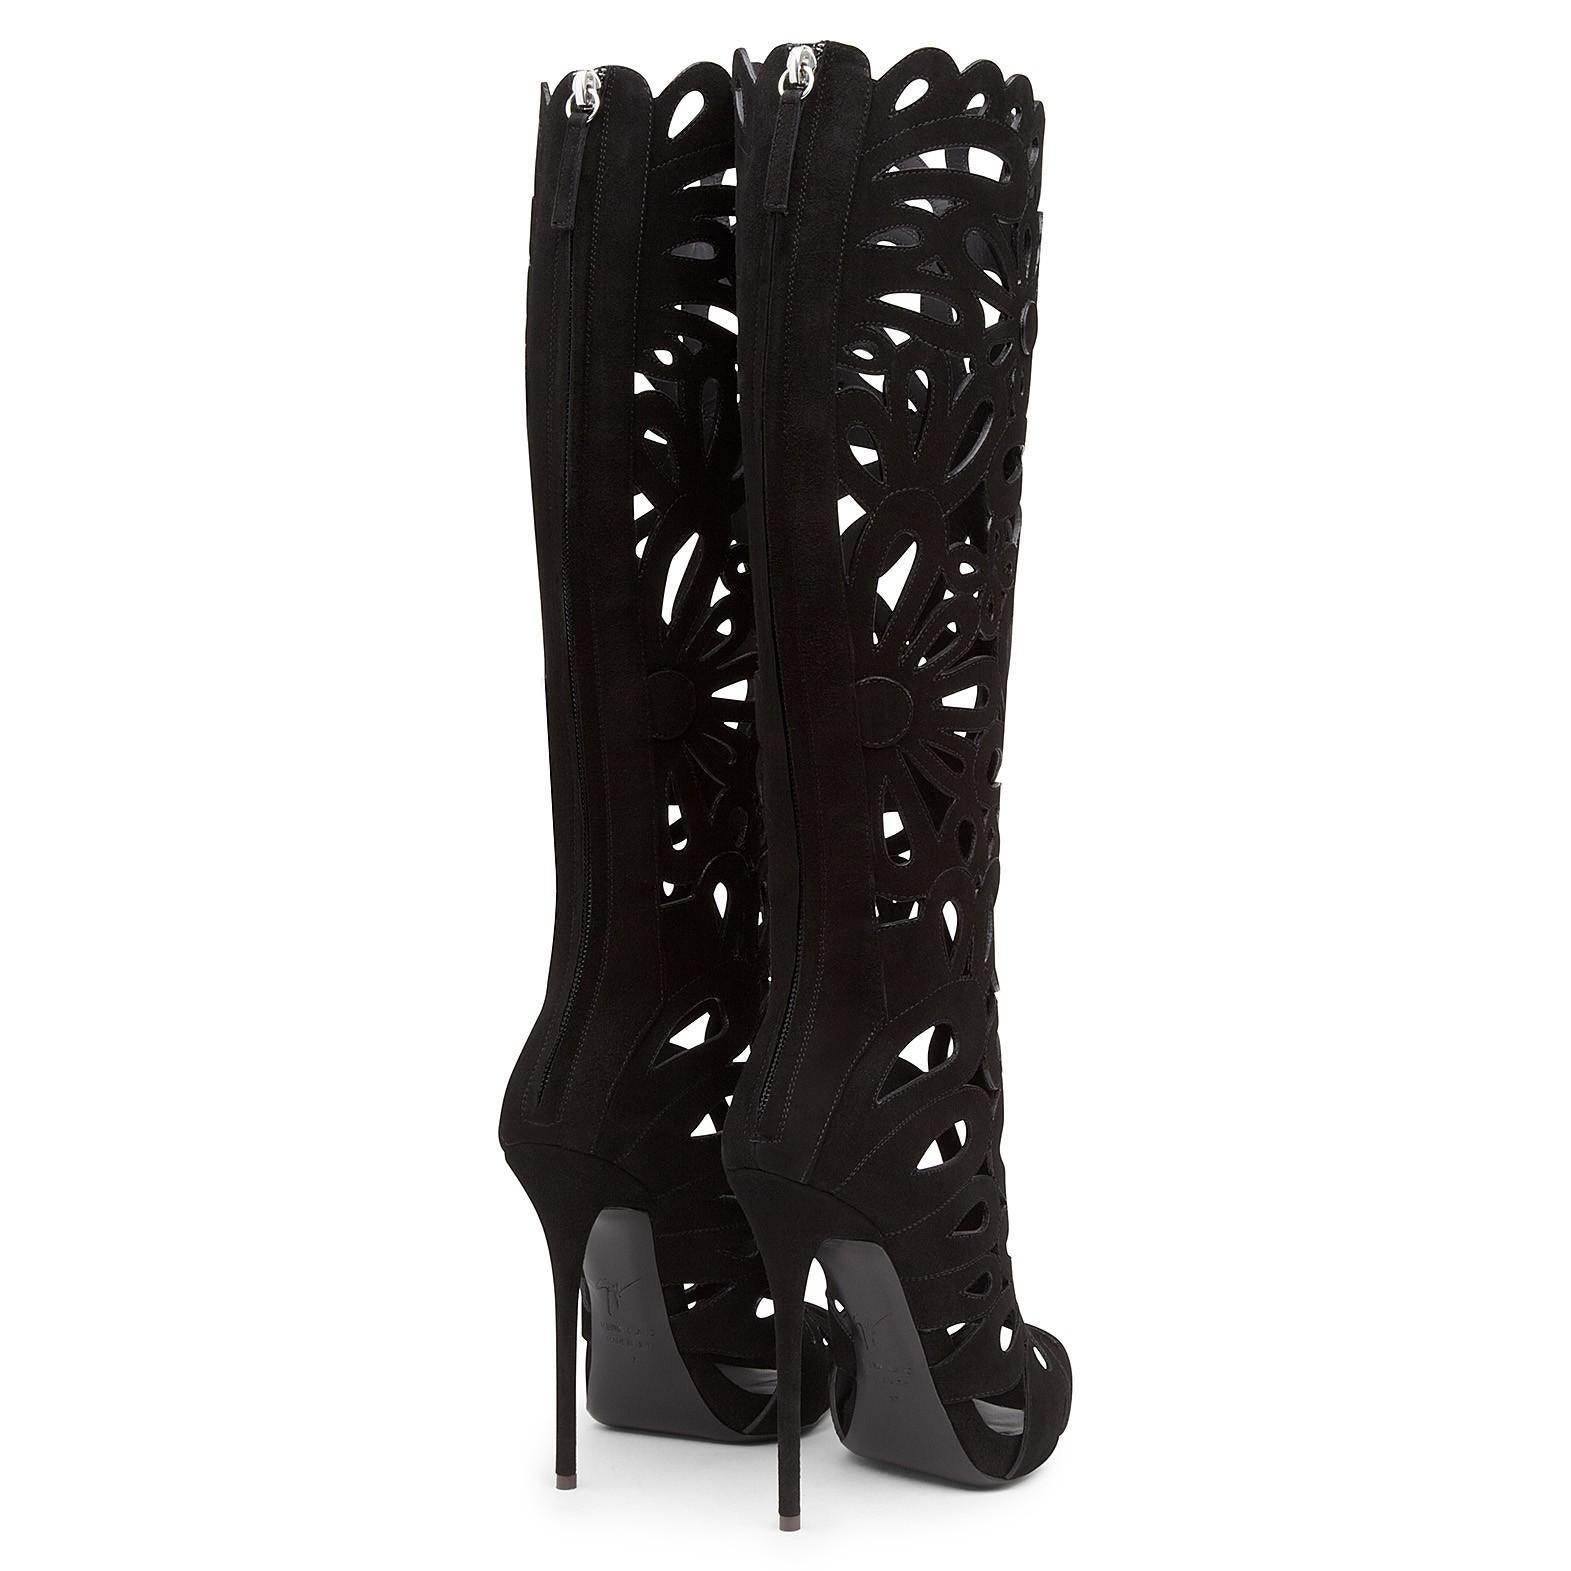 Giuseppe Zanotti NEW Black Suede Cut Out Evening Knee Heels Boots in Box 2